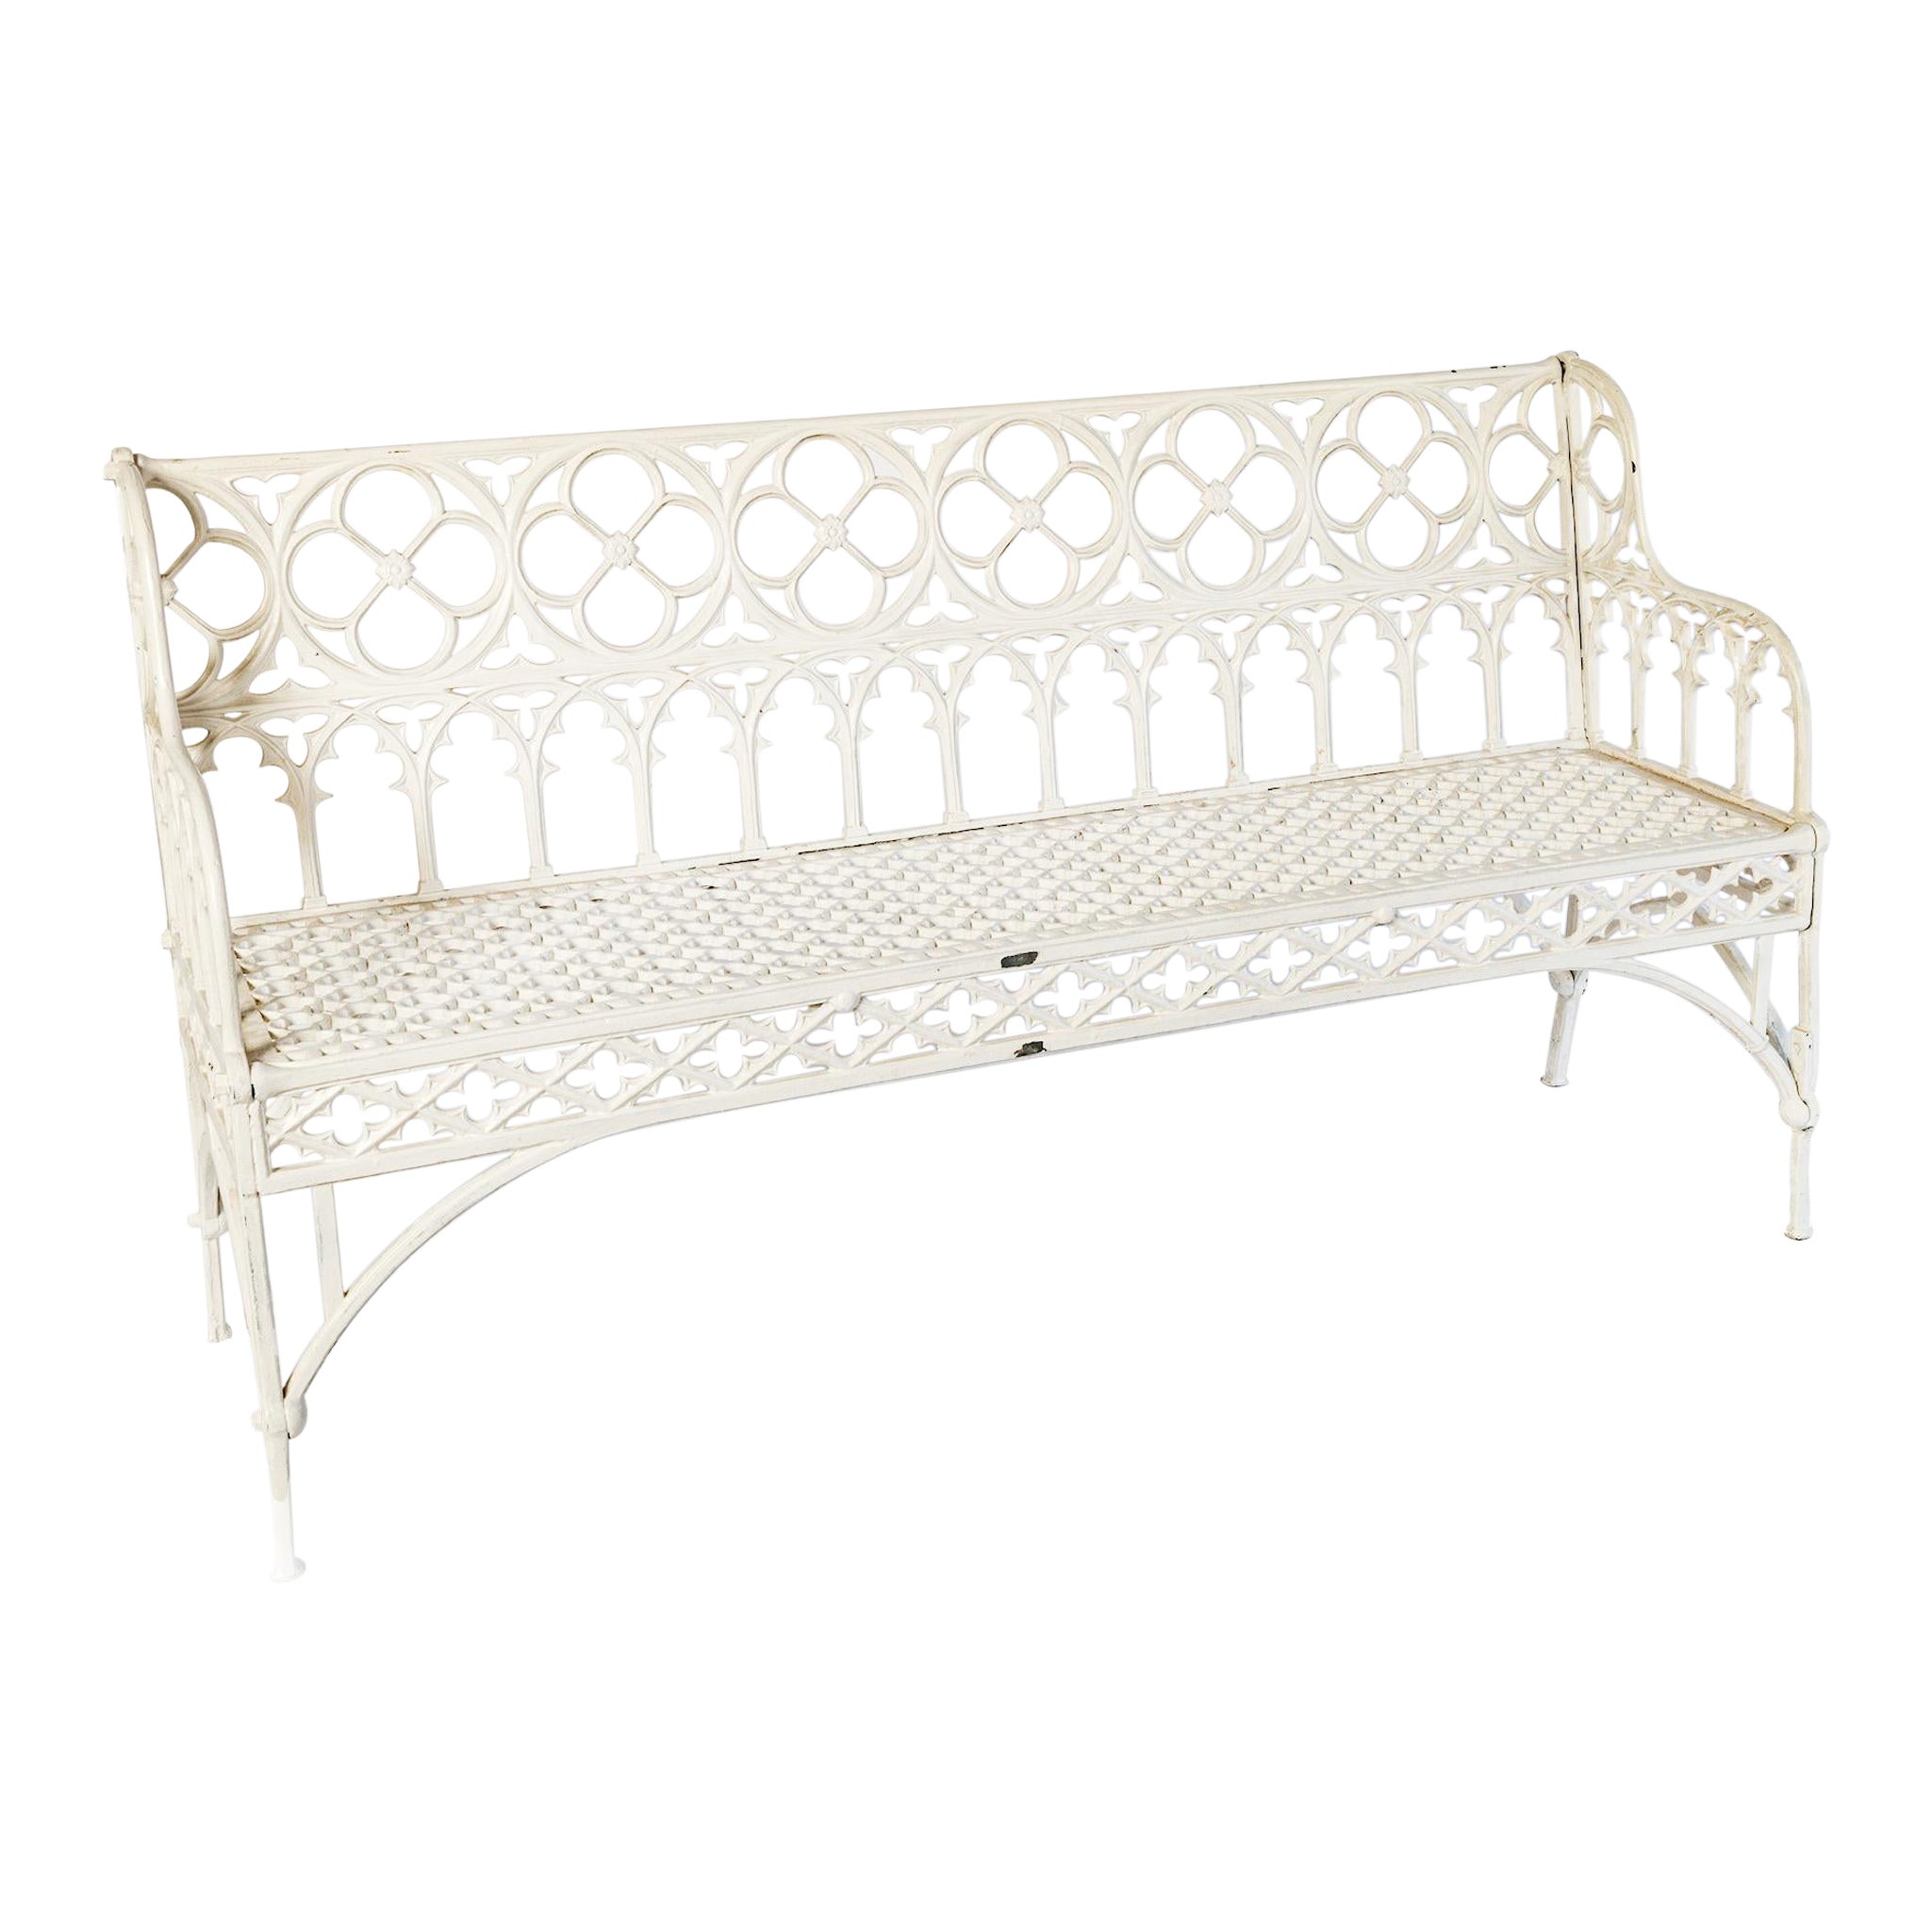 Napoleon III Gothic Cast Iron Garden Bench by Foundry Val D’osne